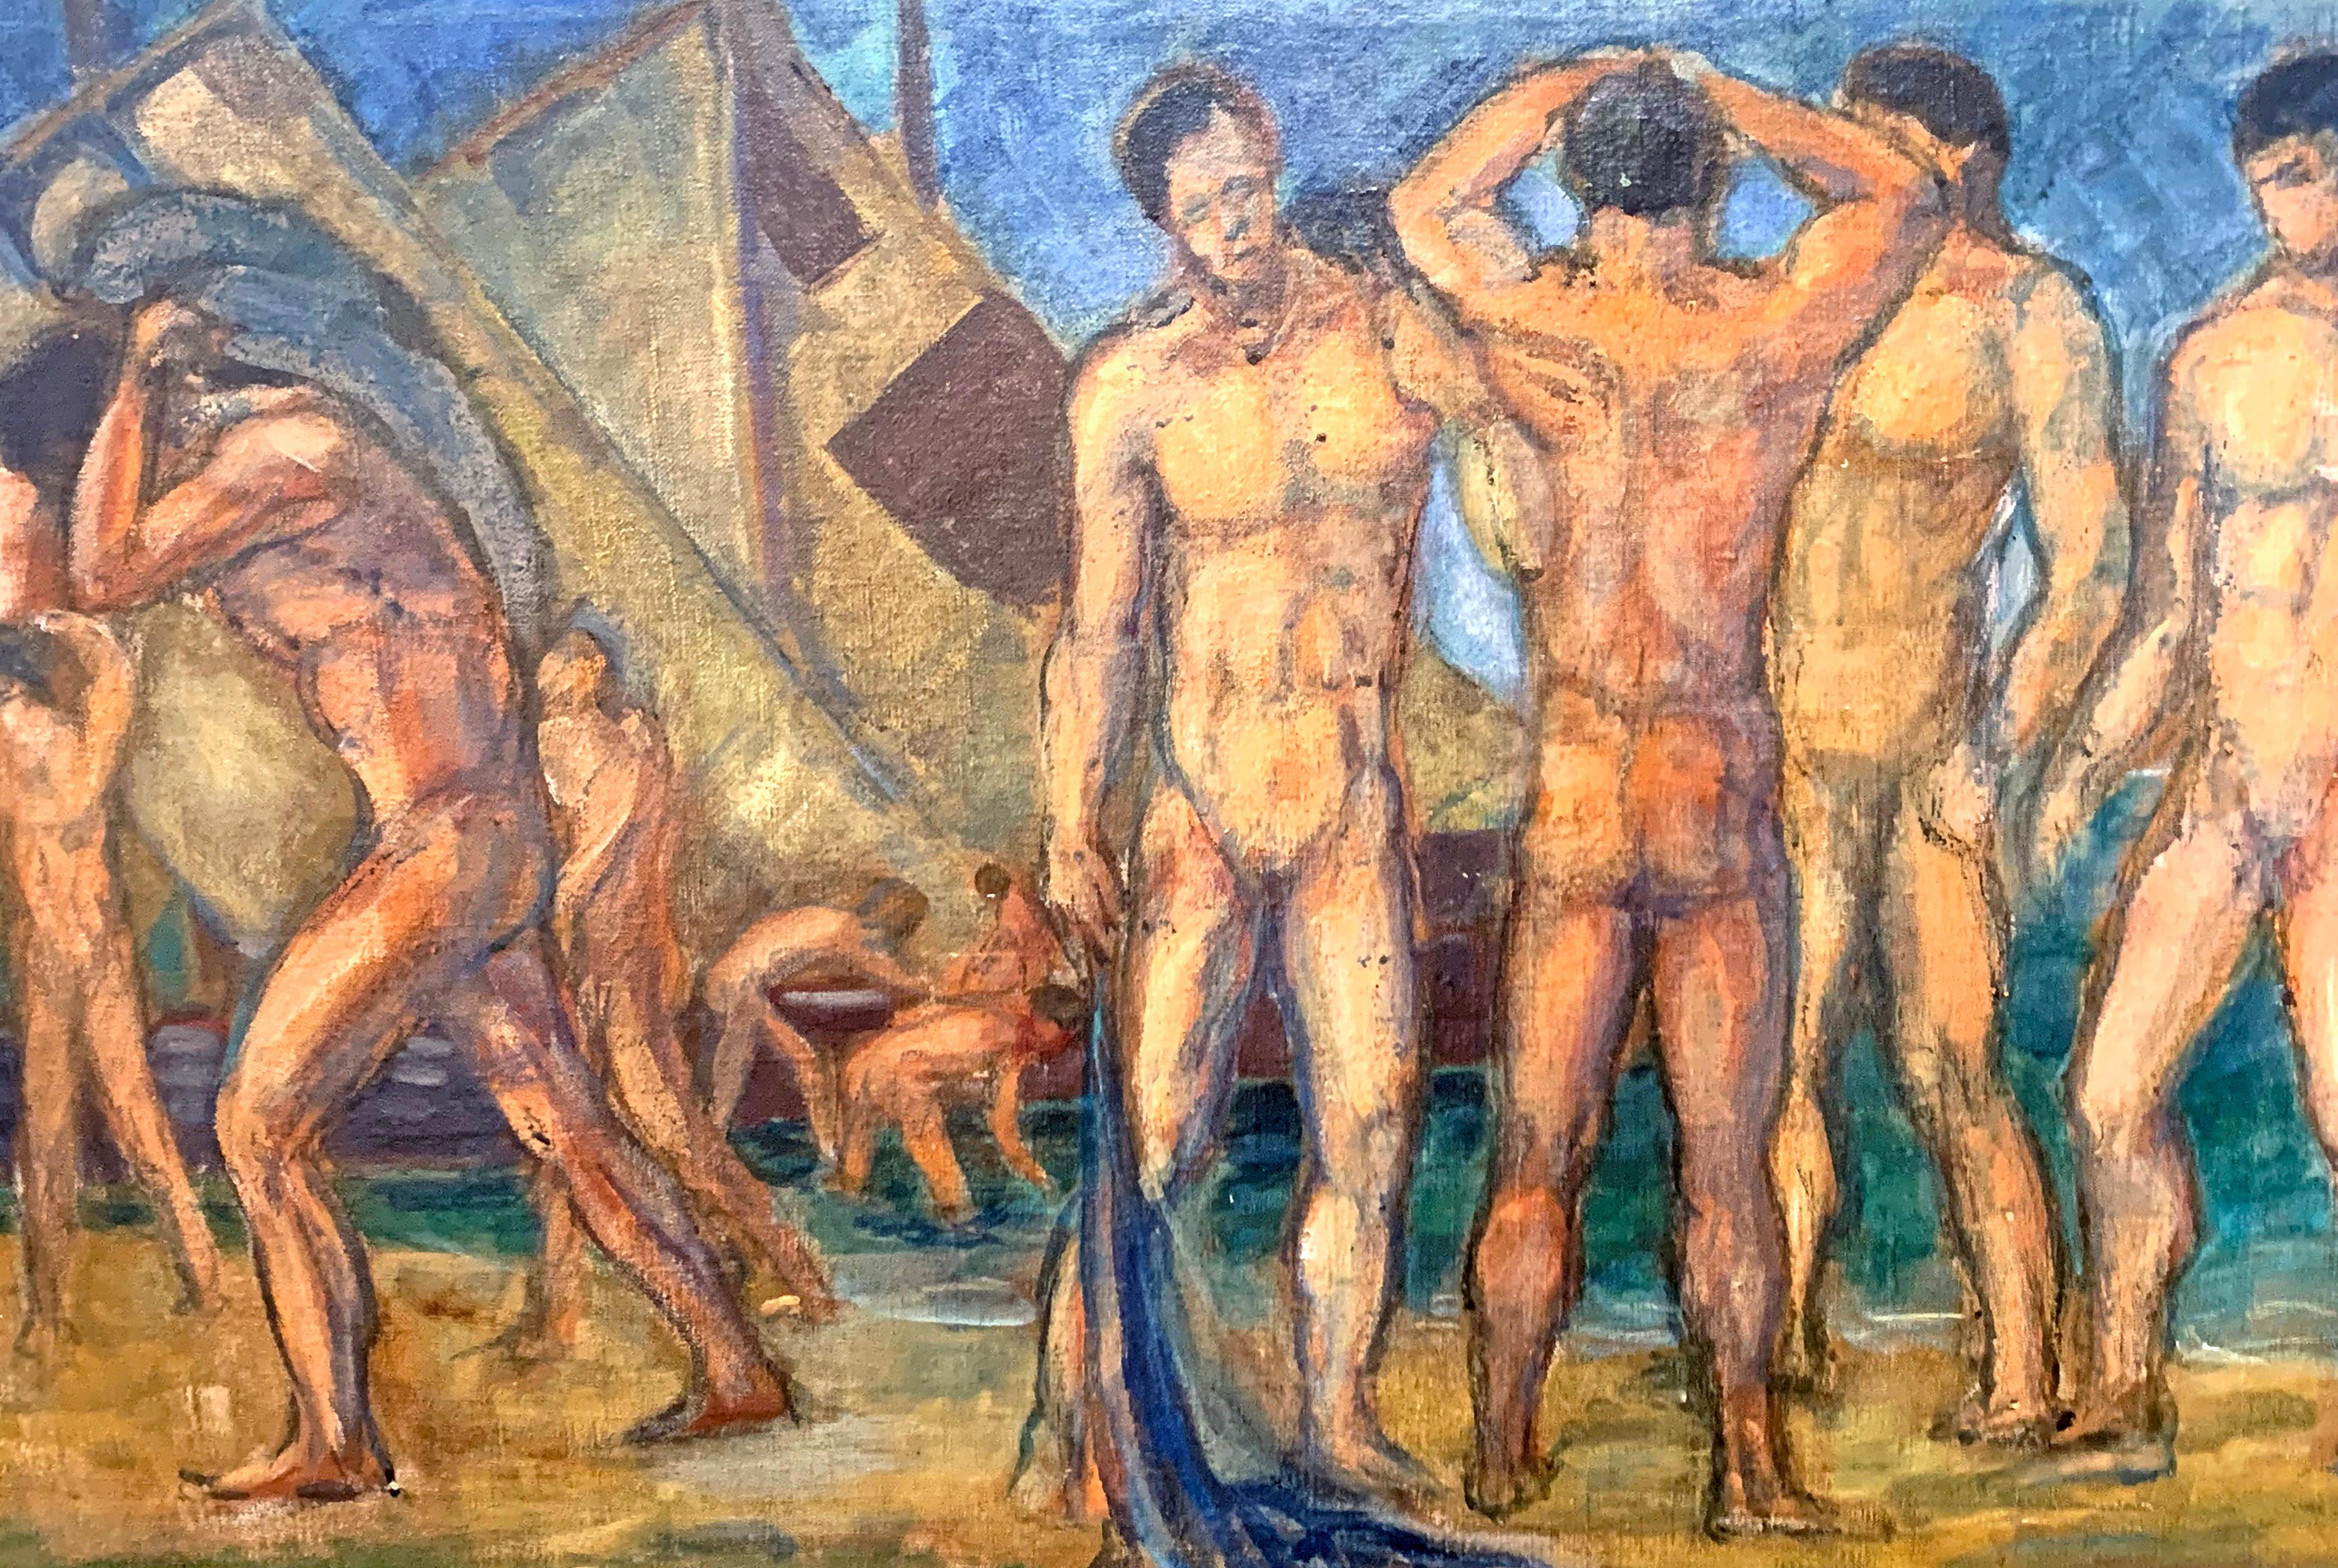 Drenched in rich color and somehow both modern and classical, this scene of nude male figures is presented as a frieze of men along a horizontal plane -- as if they are peopling a mural or temple front -- bathing, conversing, working and enjoying